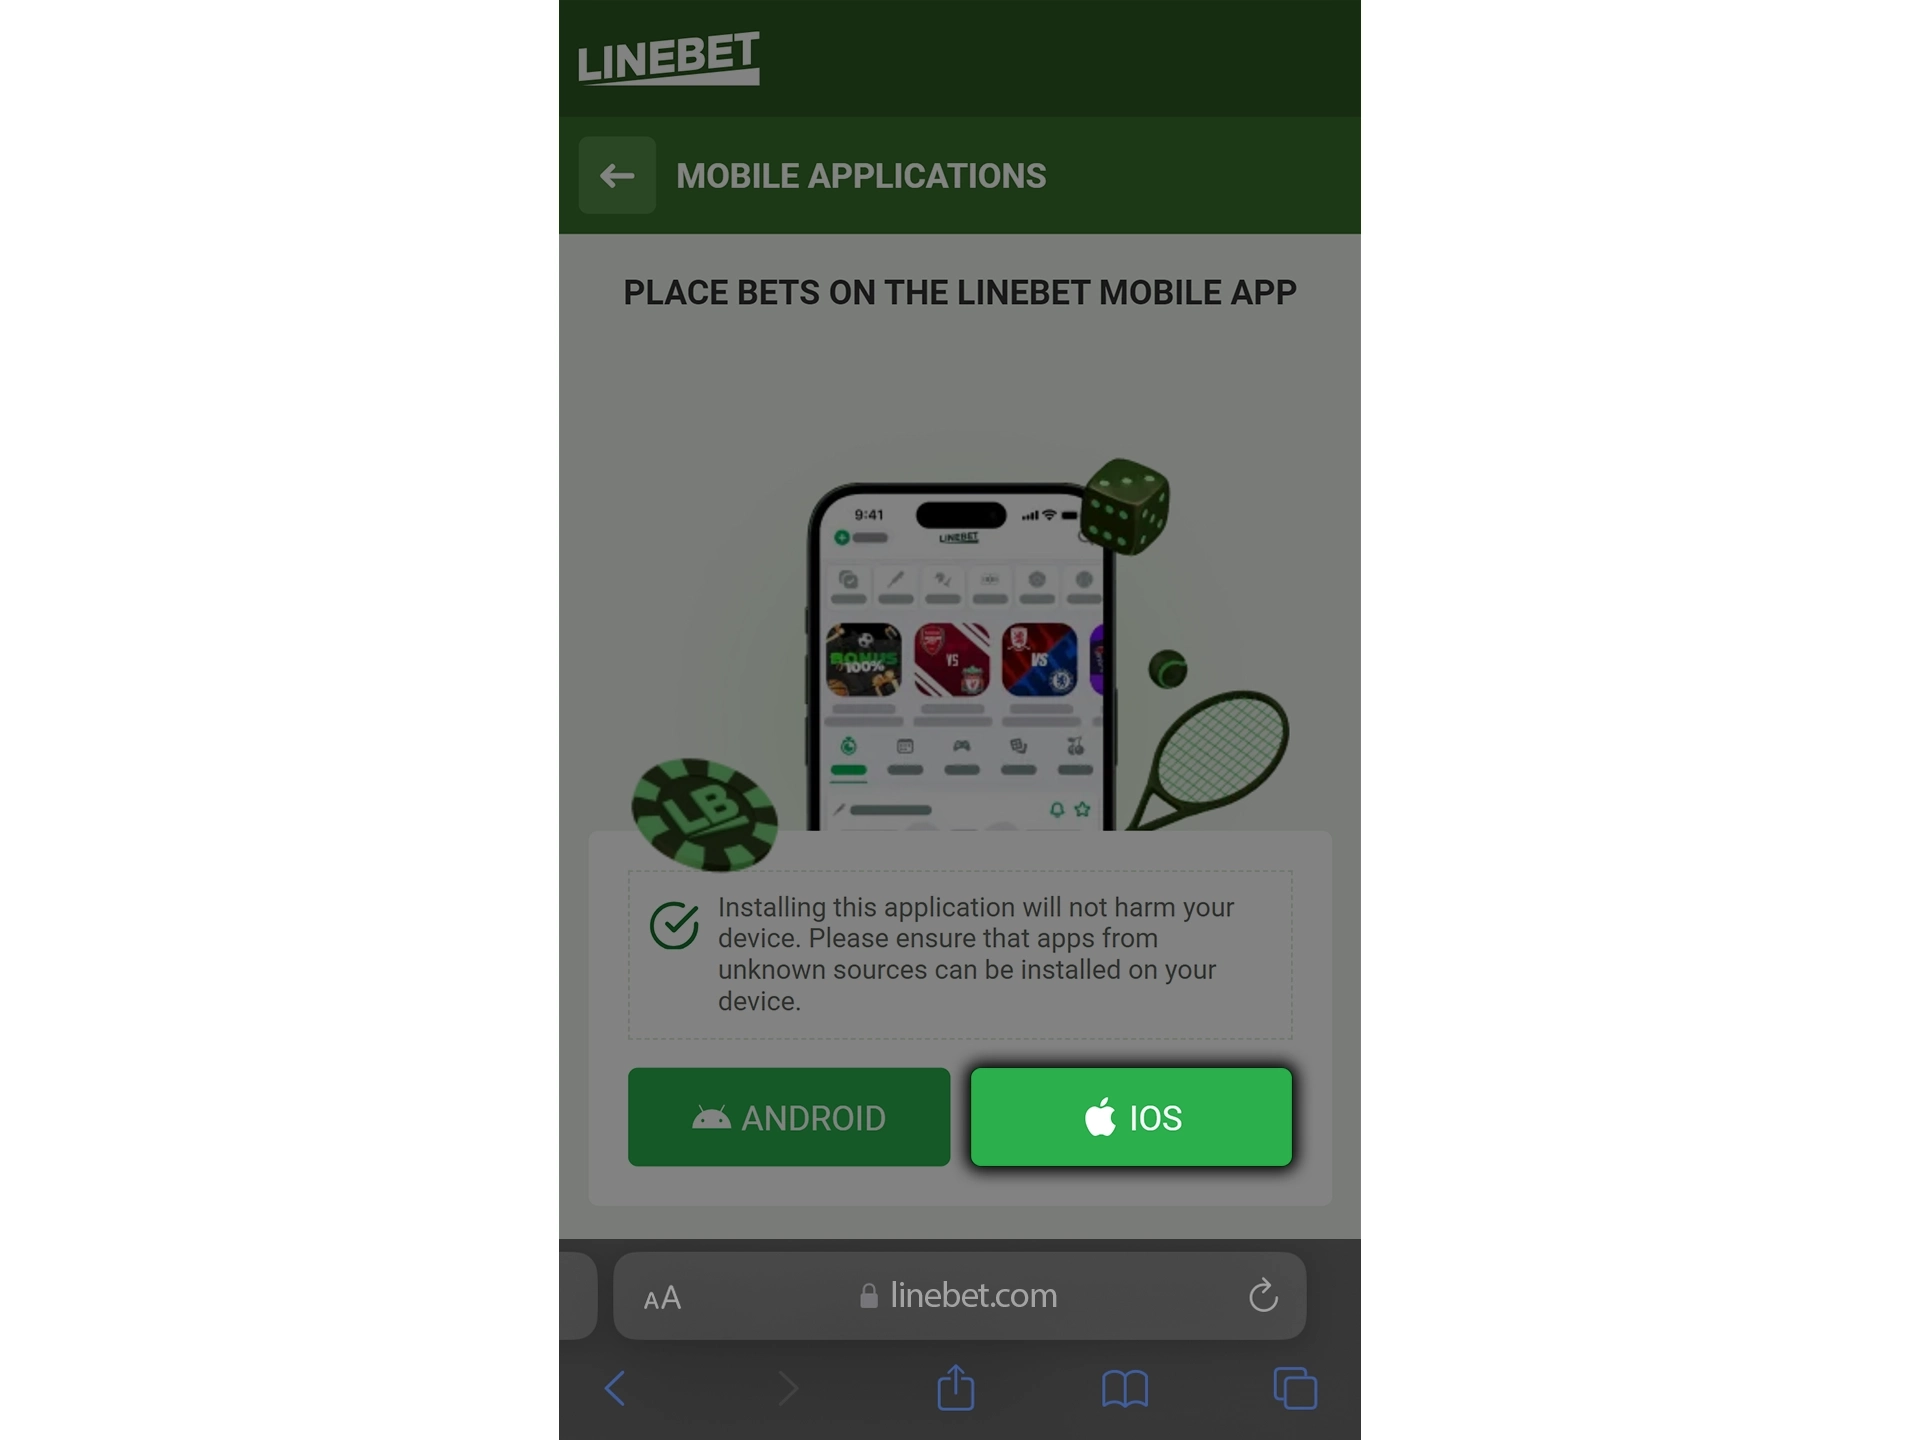 Click on the download button for the Linebet app and wait for the installation to complete.